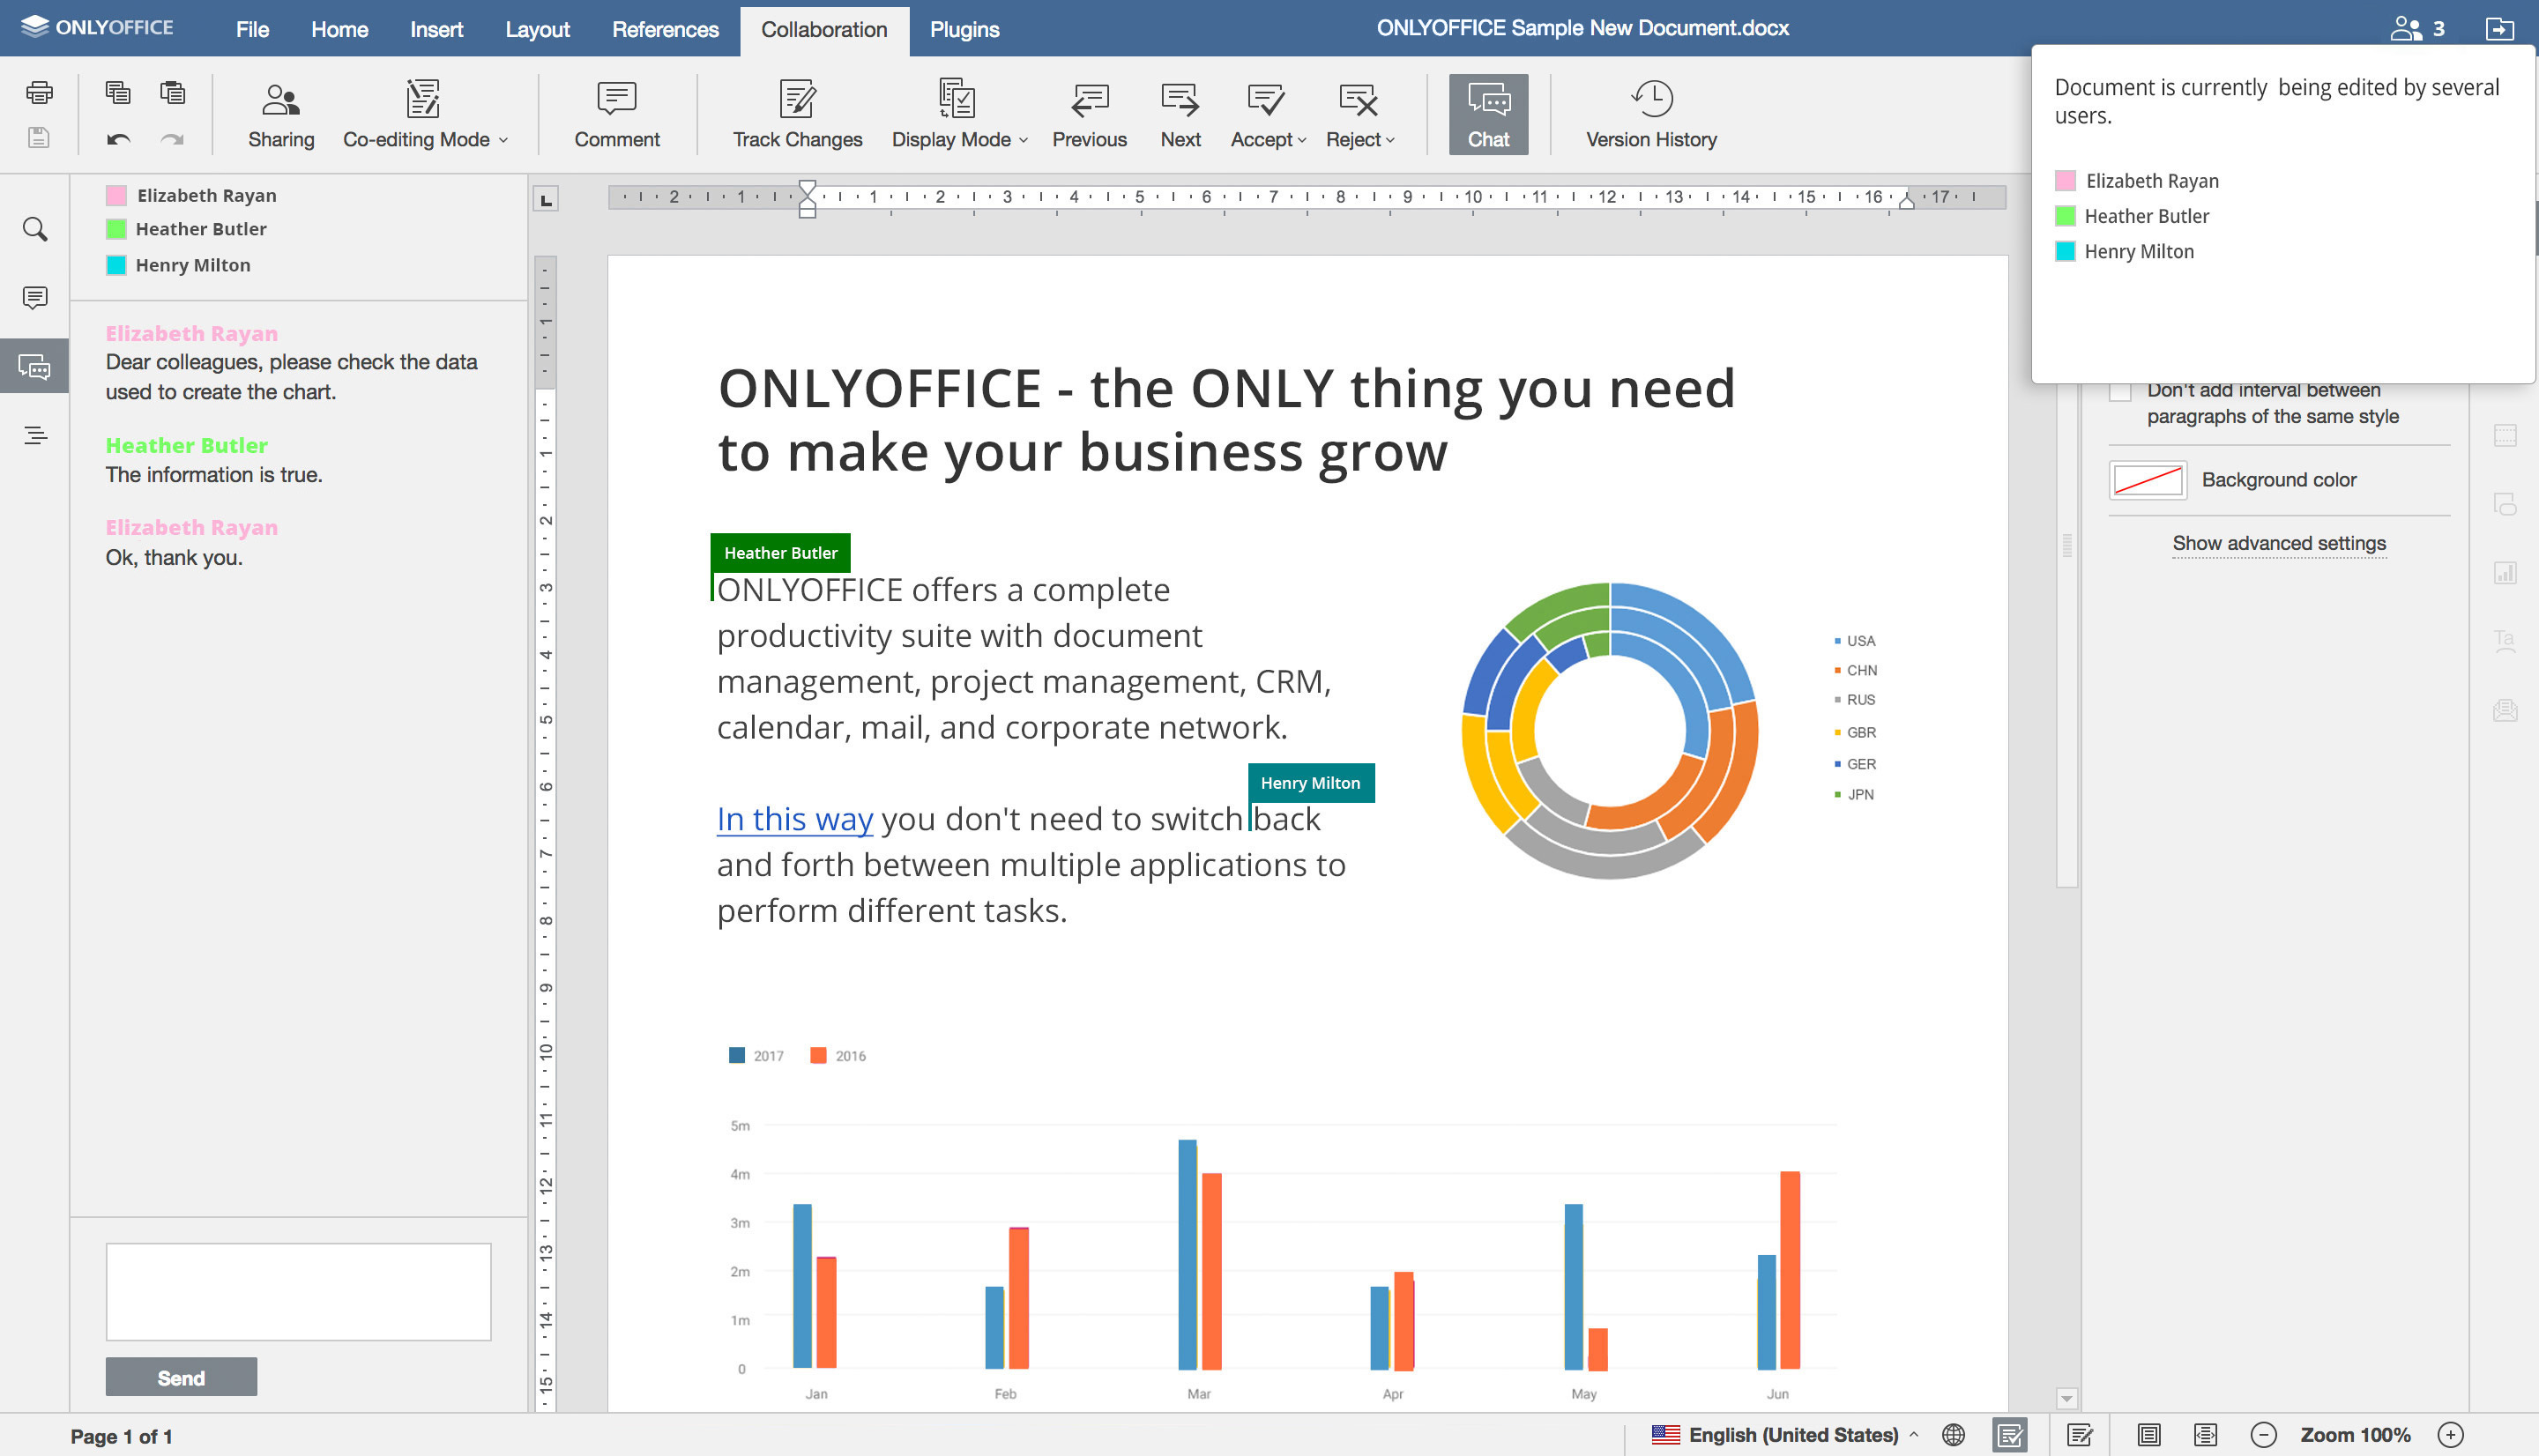 downloading ONLYOFFICE 7.4.1.36